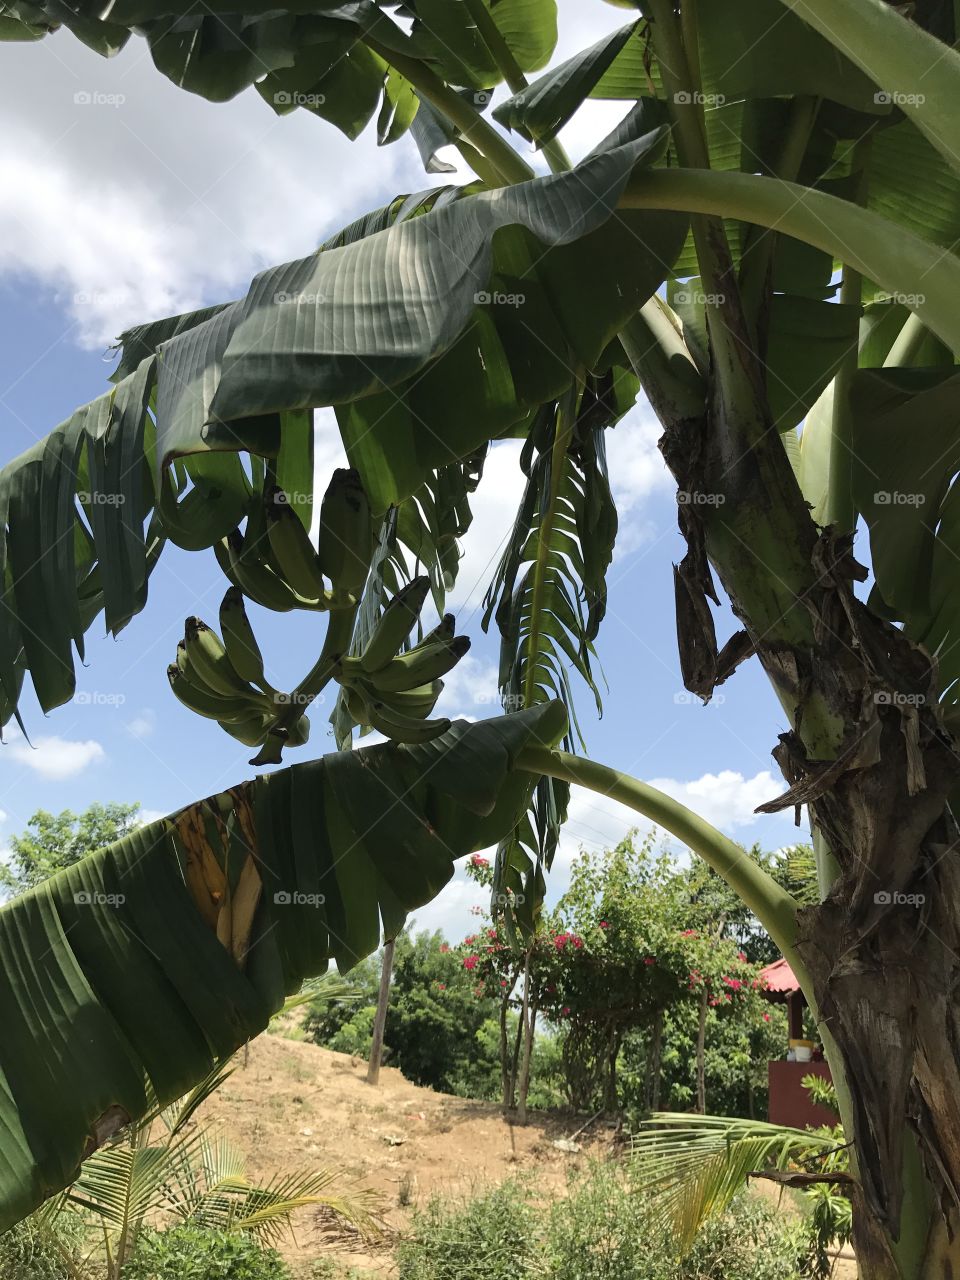 Platano tree growing on a farm in Colombia